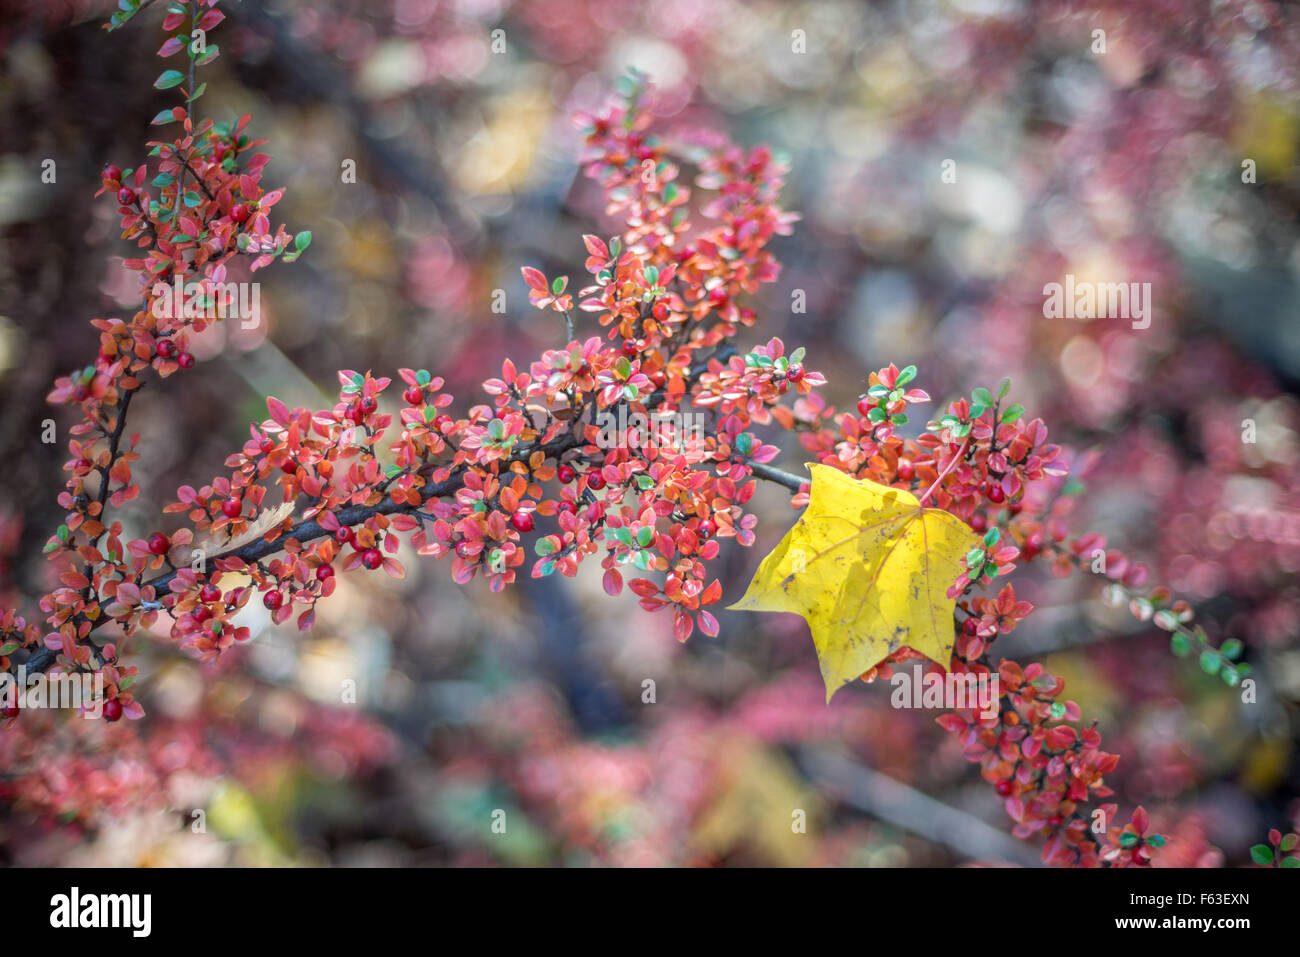 Yellow maple leaf on the cotoneaster branch full of red berriees Stock Photo